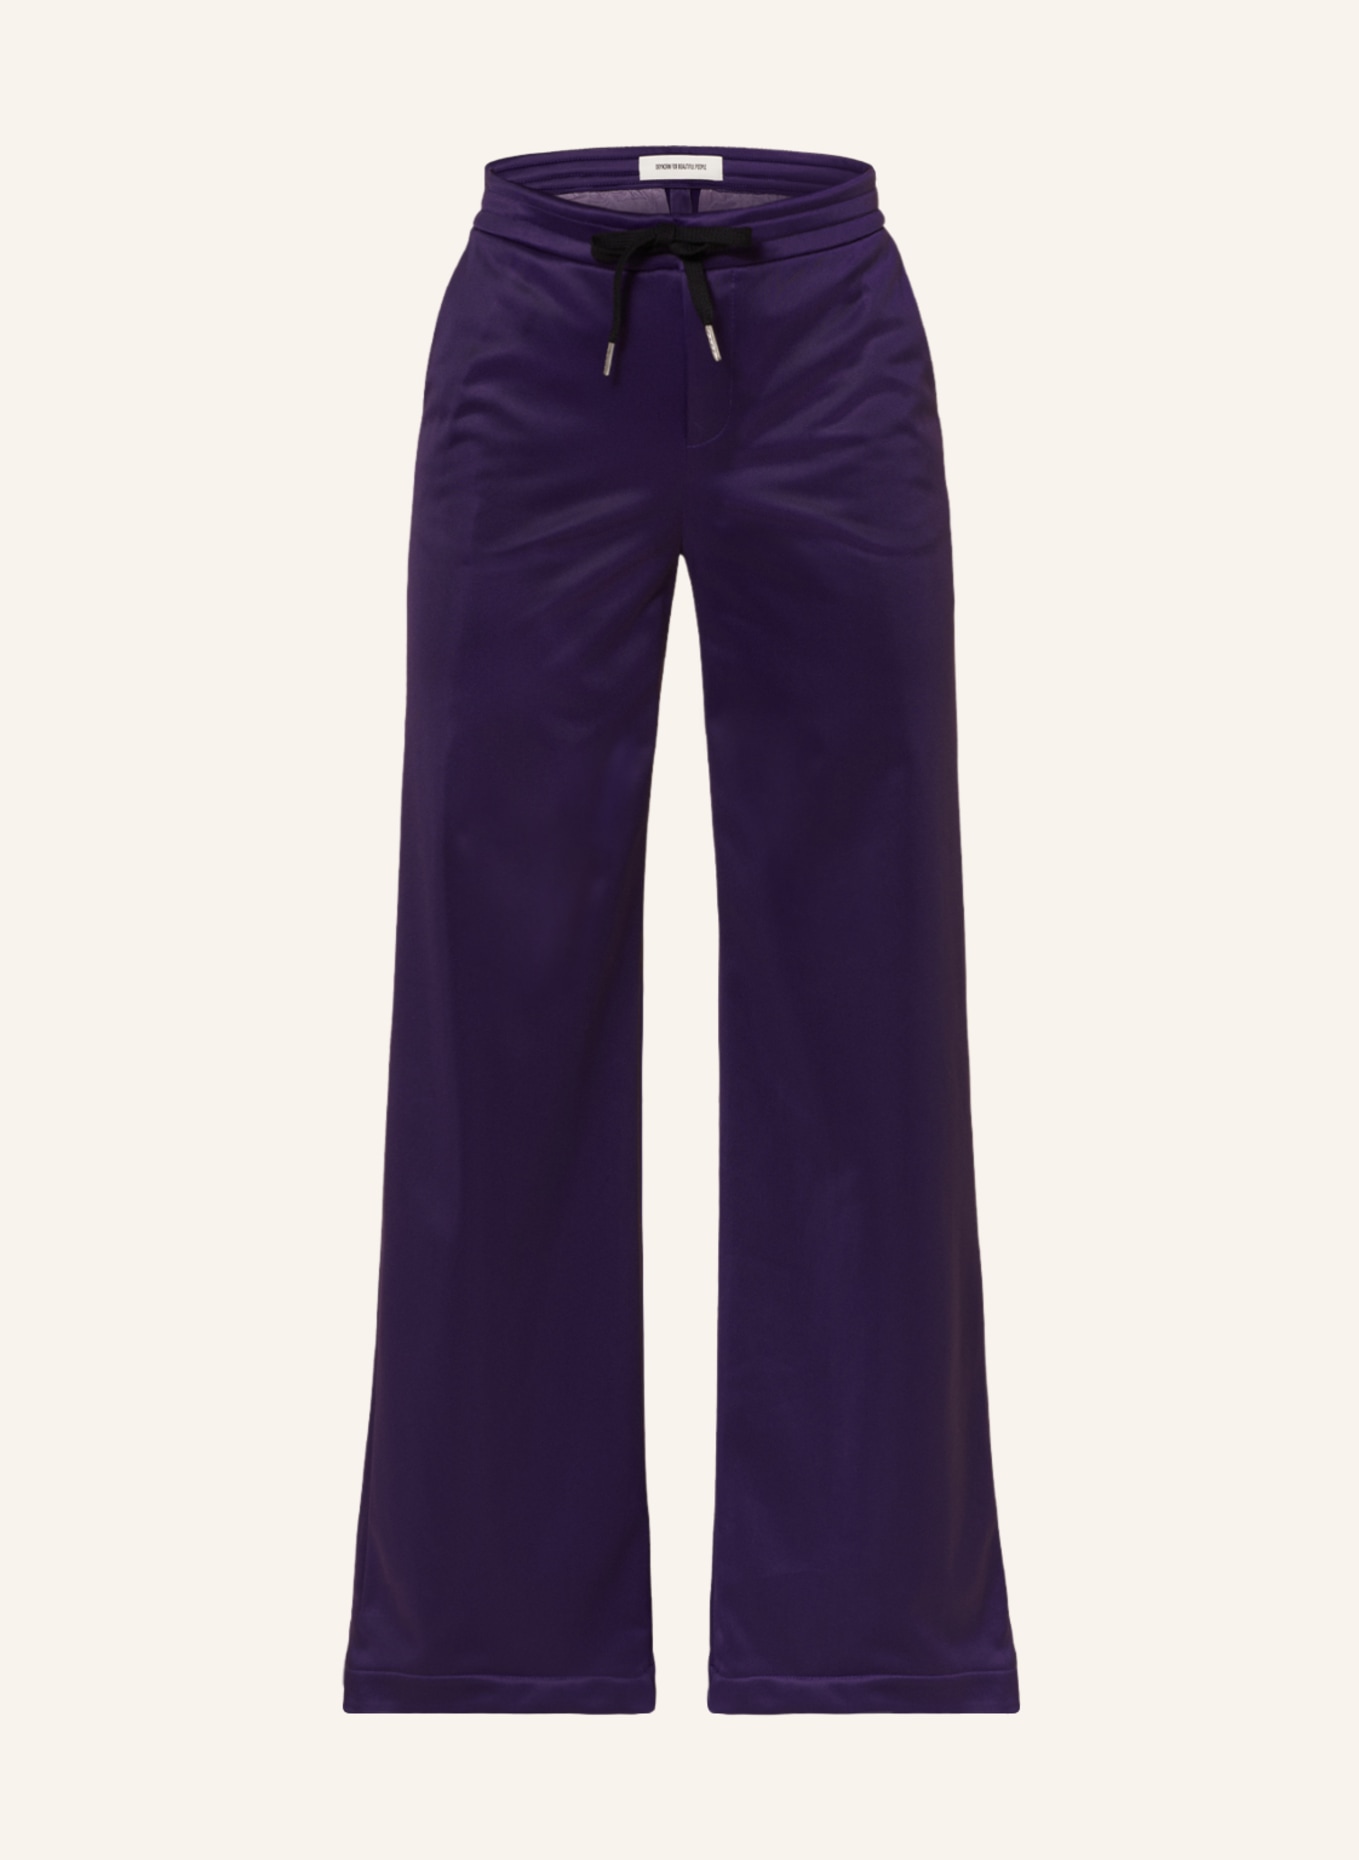 Deep Purple Ladies Trouser at best price in New Delhi by Achievers India |  ID: 8754286562